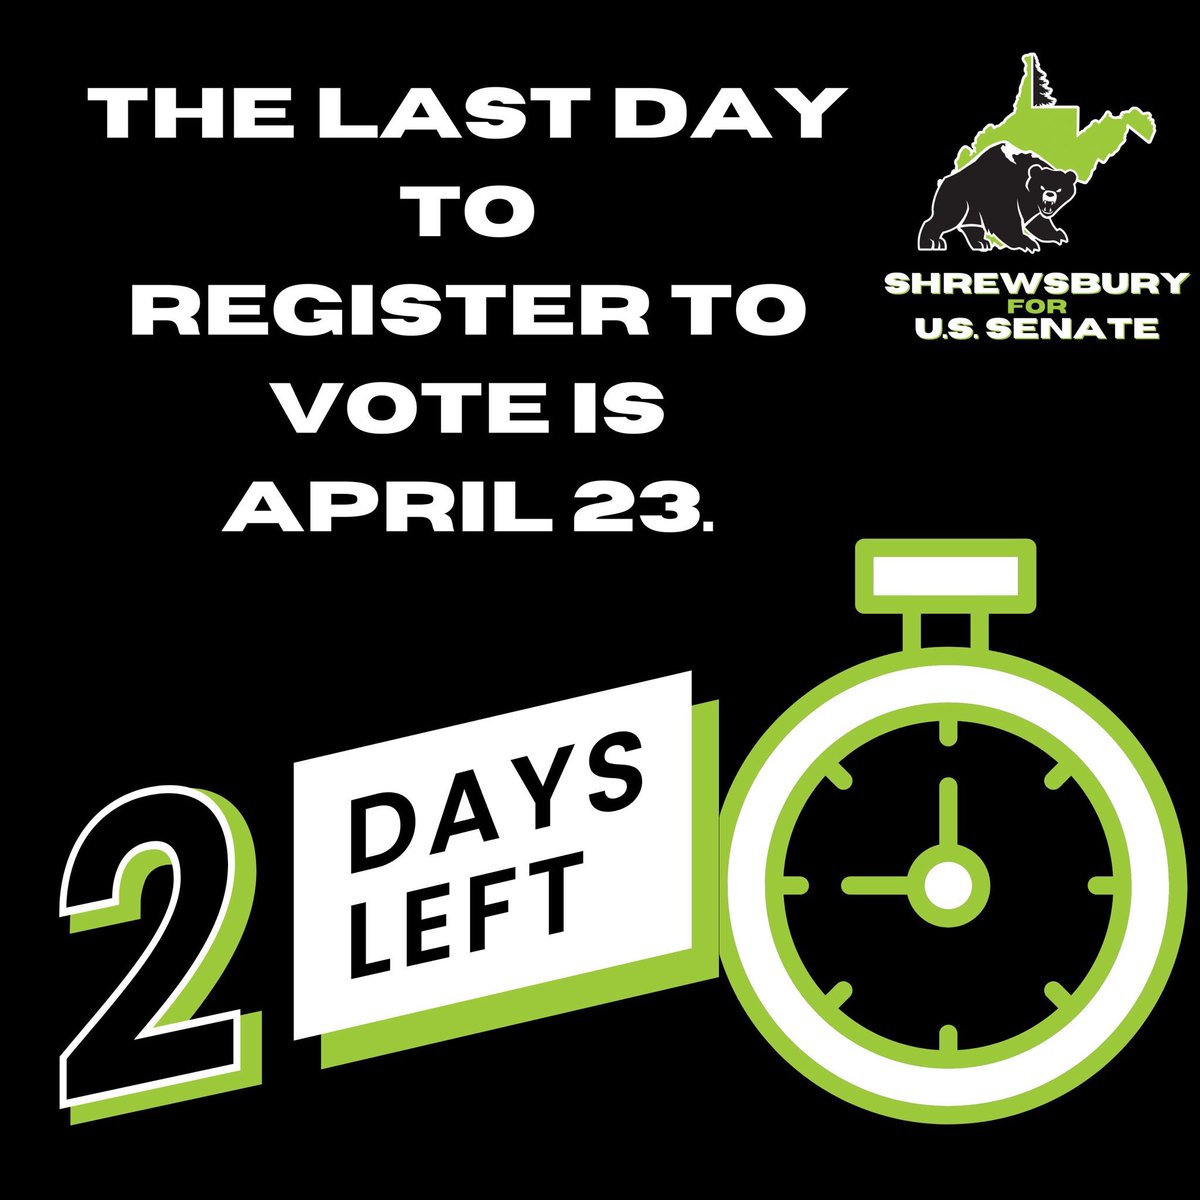 🚨IMPORTANT🚨 The last day to register to vote or to change your registration is April 23rd, tomorrow. That’s 2 days counting today! To check your registration status, please visit apps.sos.wv.gov/Elections/Vote… To register to vote or change your registration, please visit…